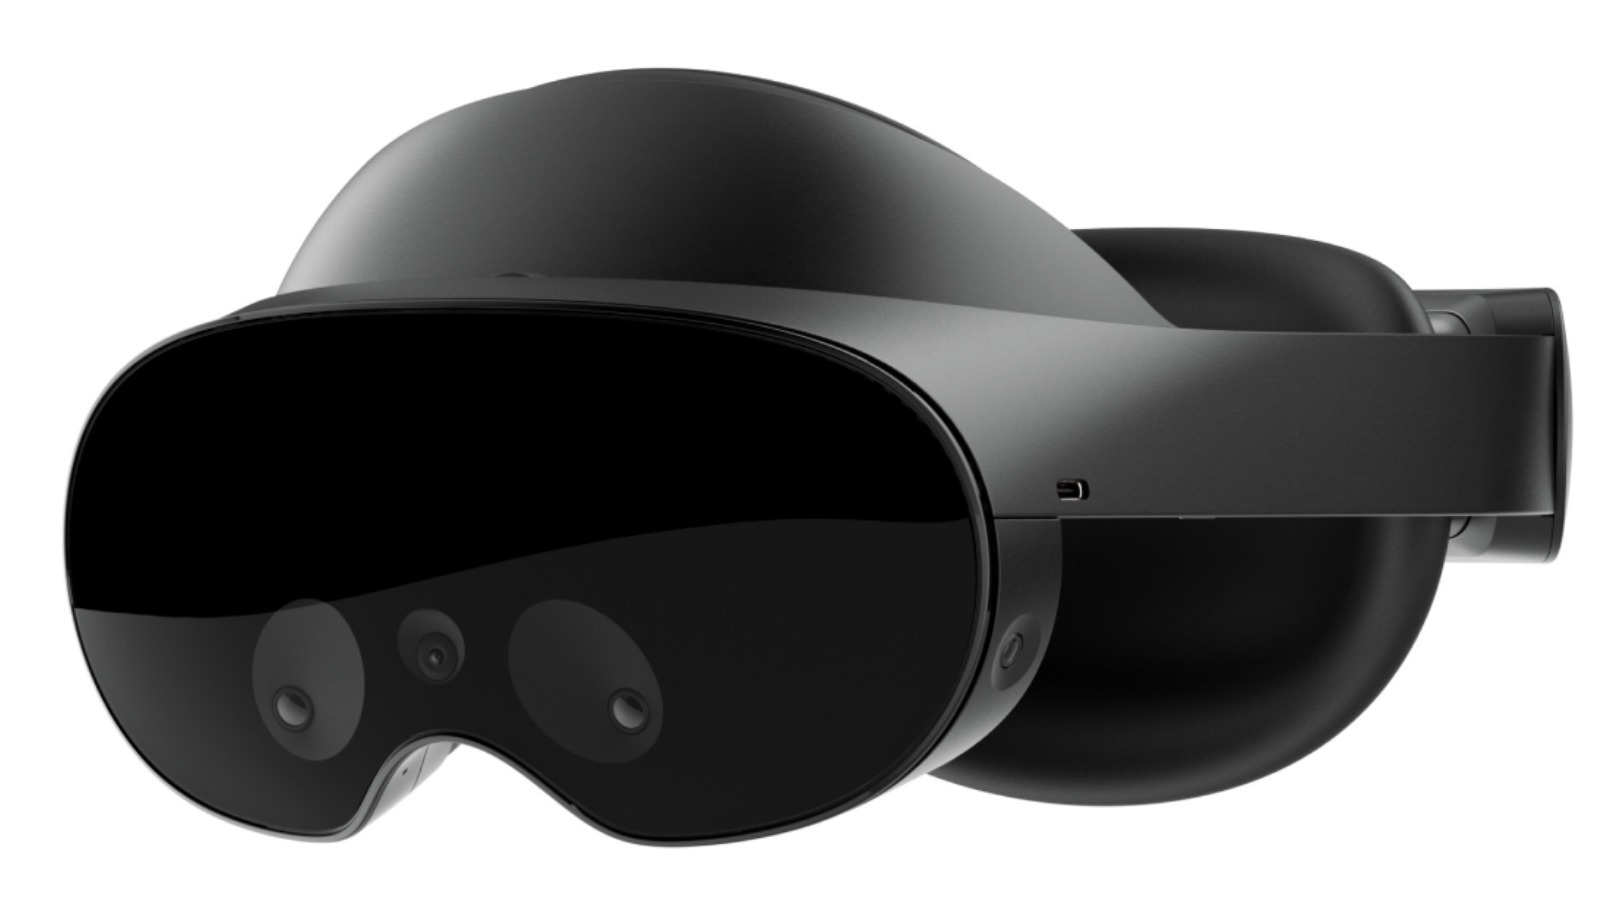 Meta doesn't seem to know its VR headsets are game consoles - The Verge